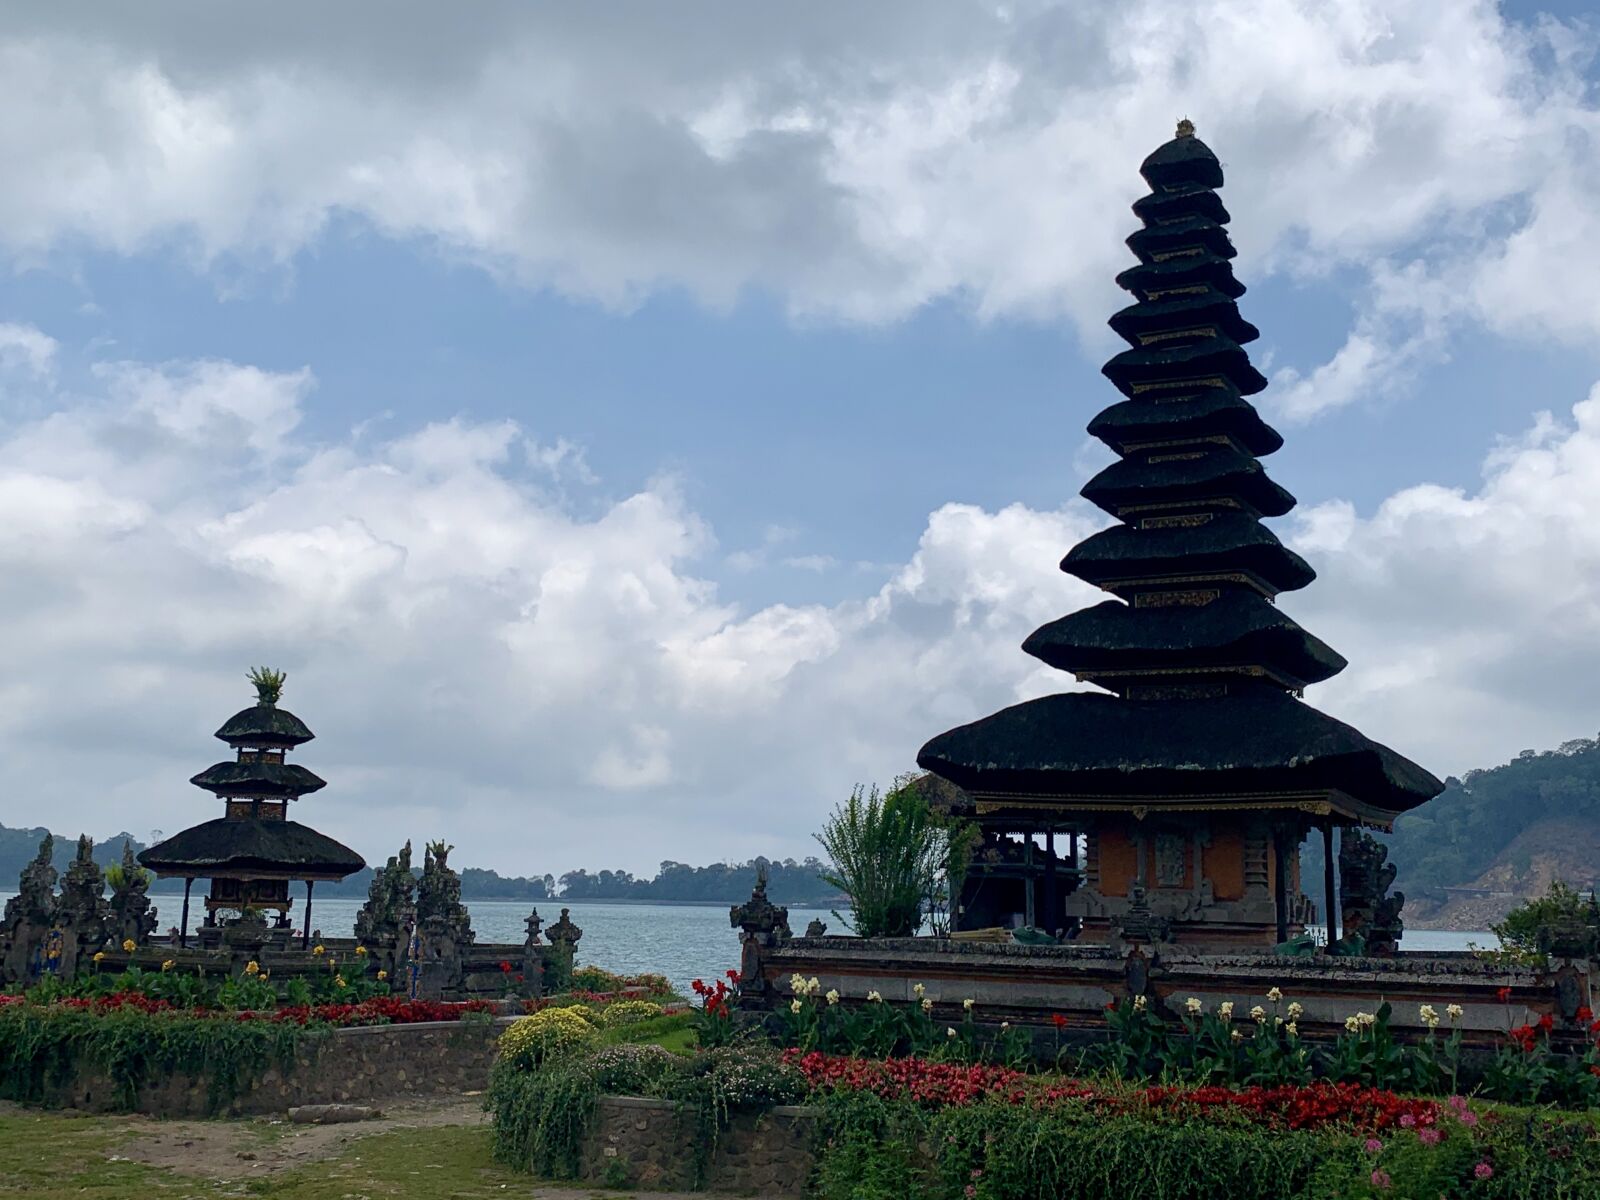 Apple iPhone XR sample photo. Temple, bali, indonesia photography